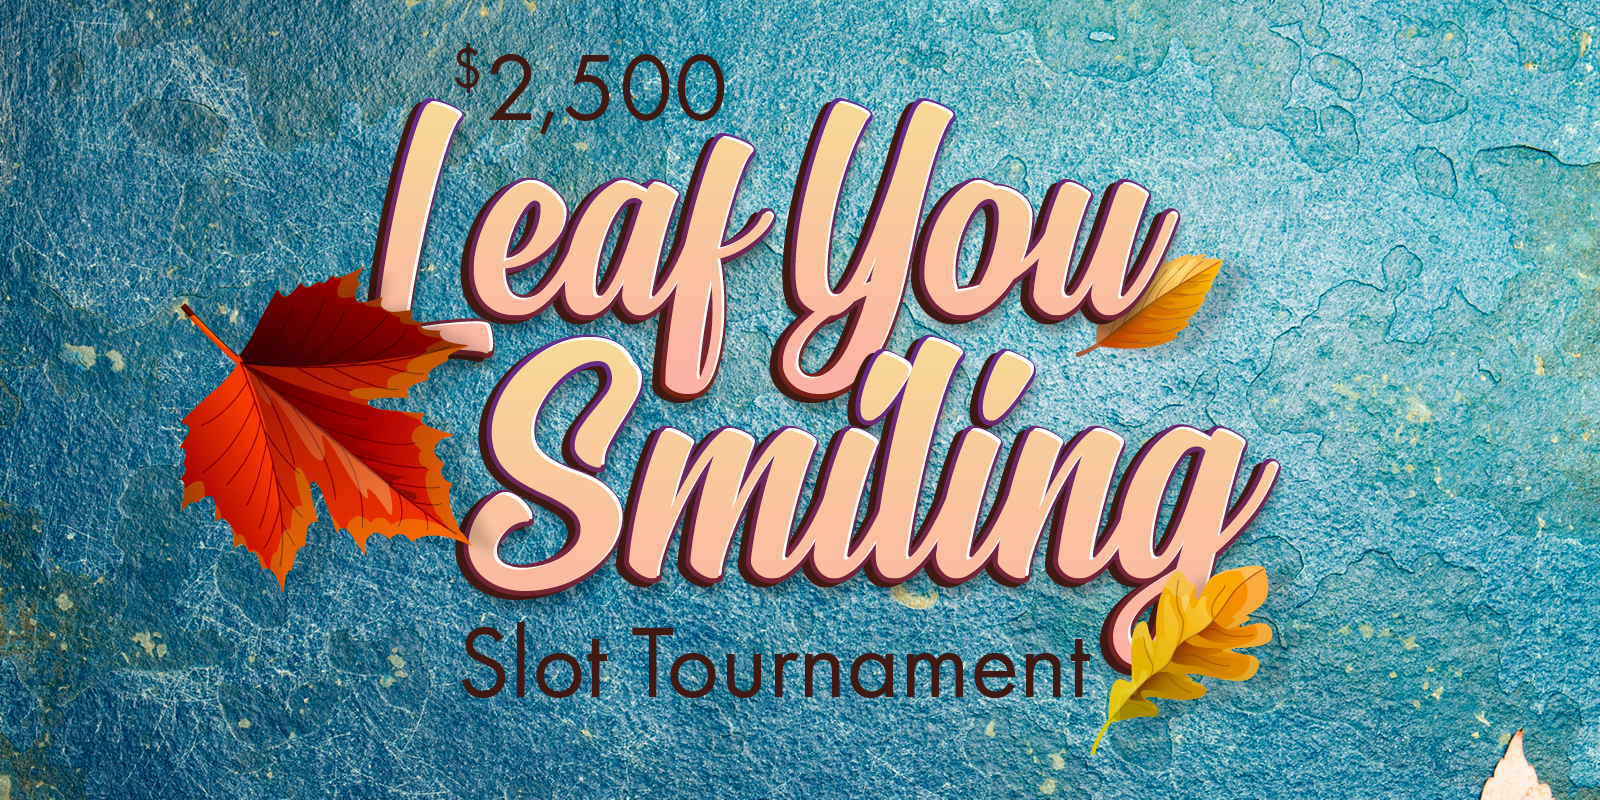 $2,500 Leaf Your Smiling Slot Tournament creative showing a teal stone background with autumn colored leaves for a fall theme